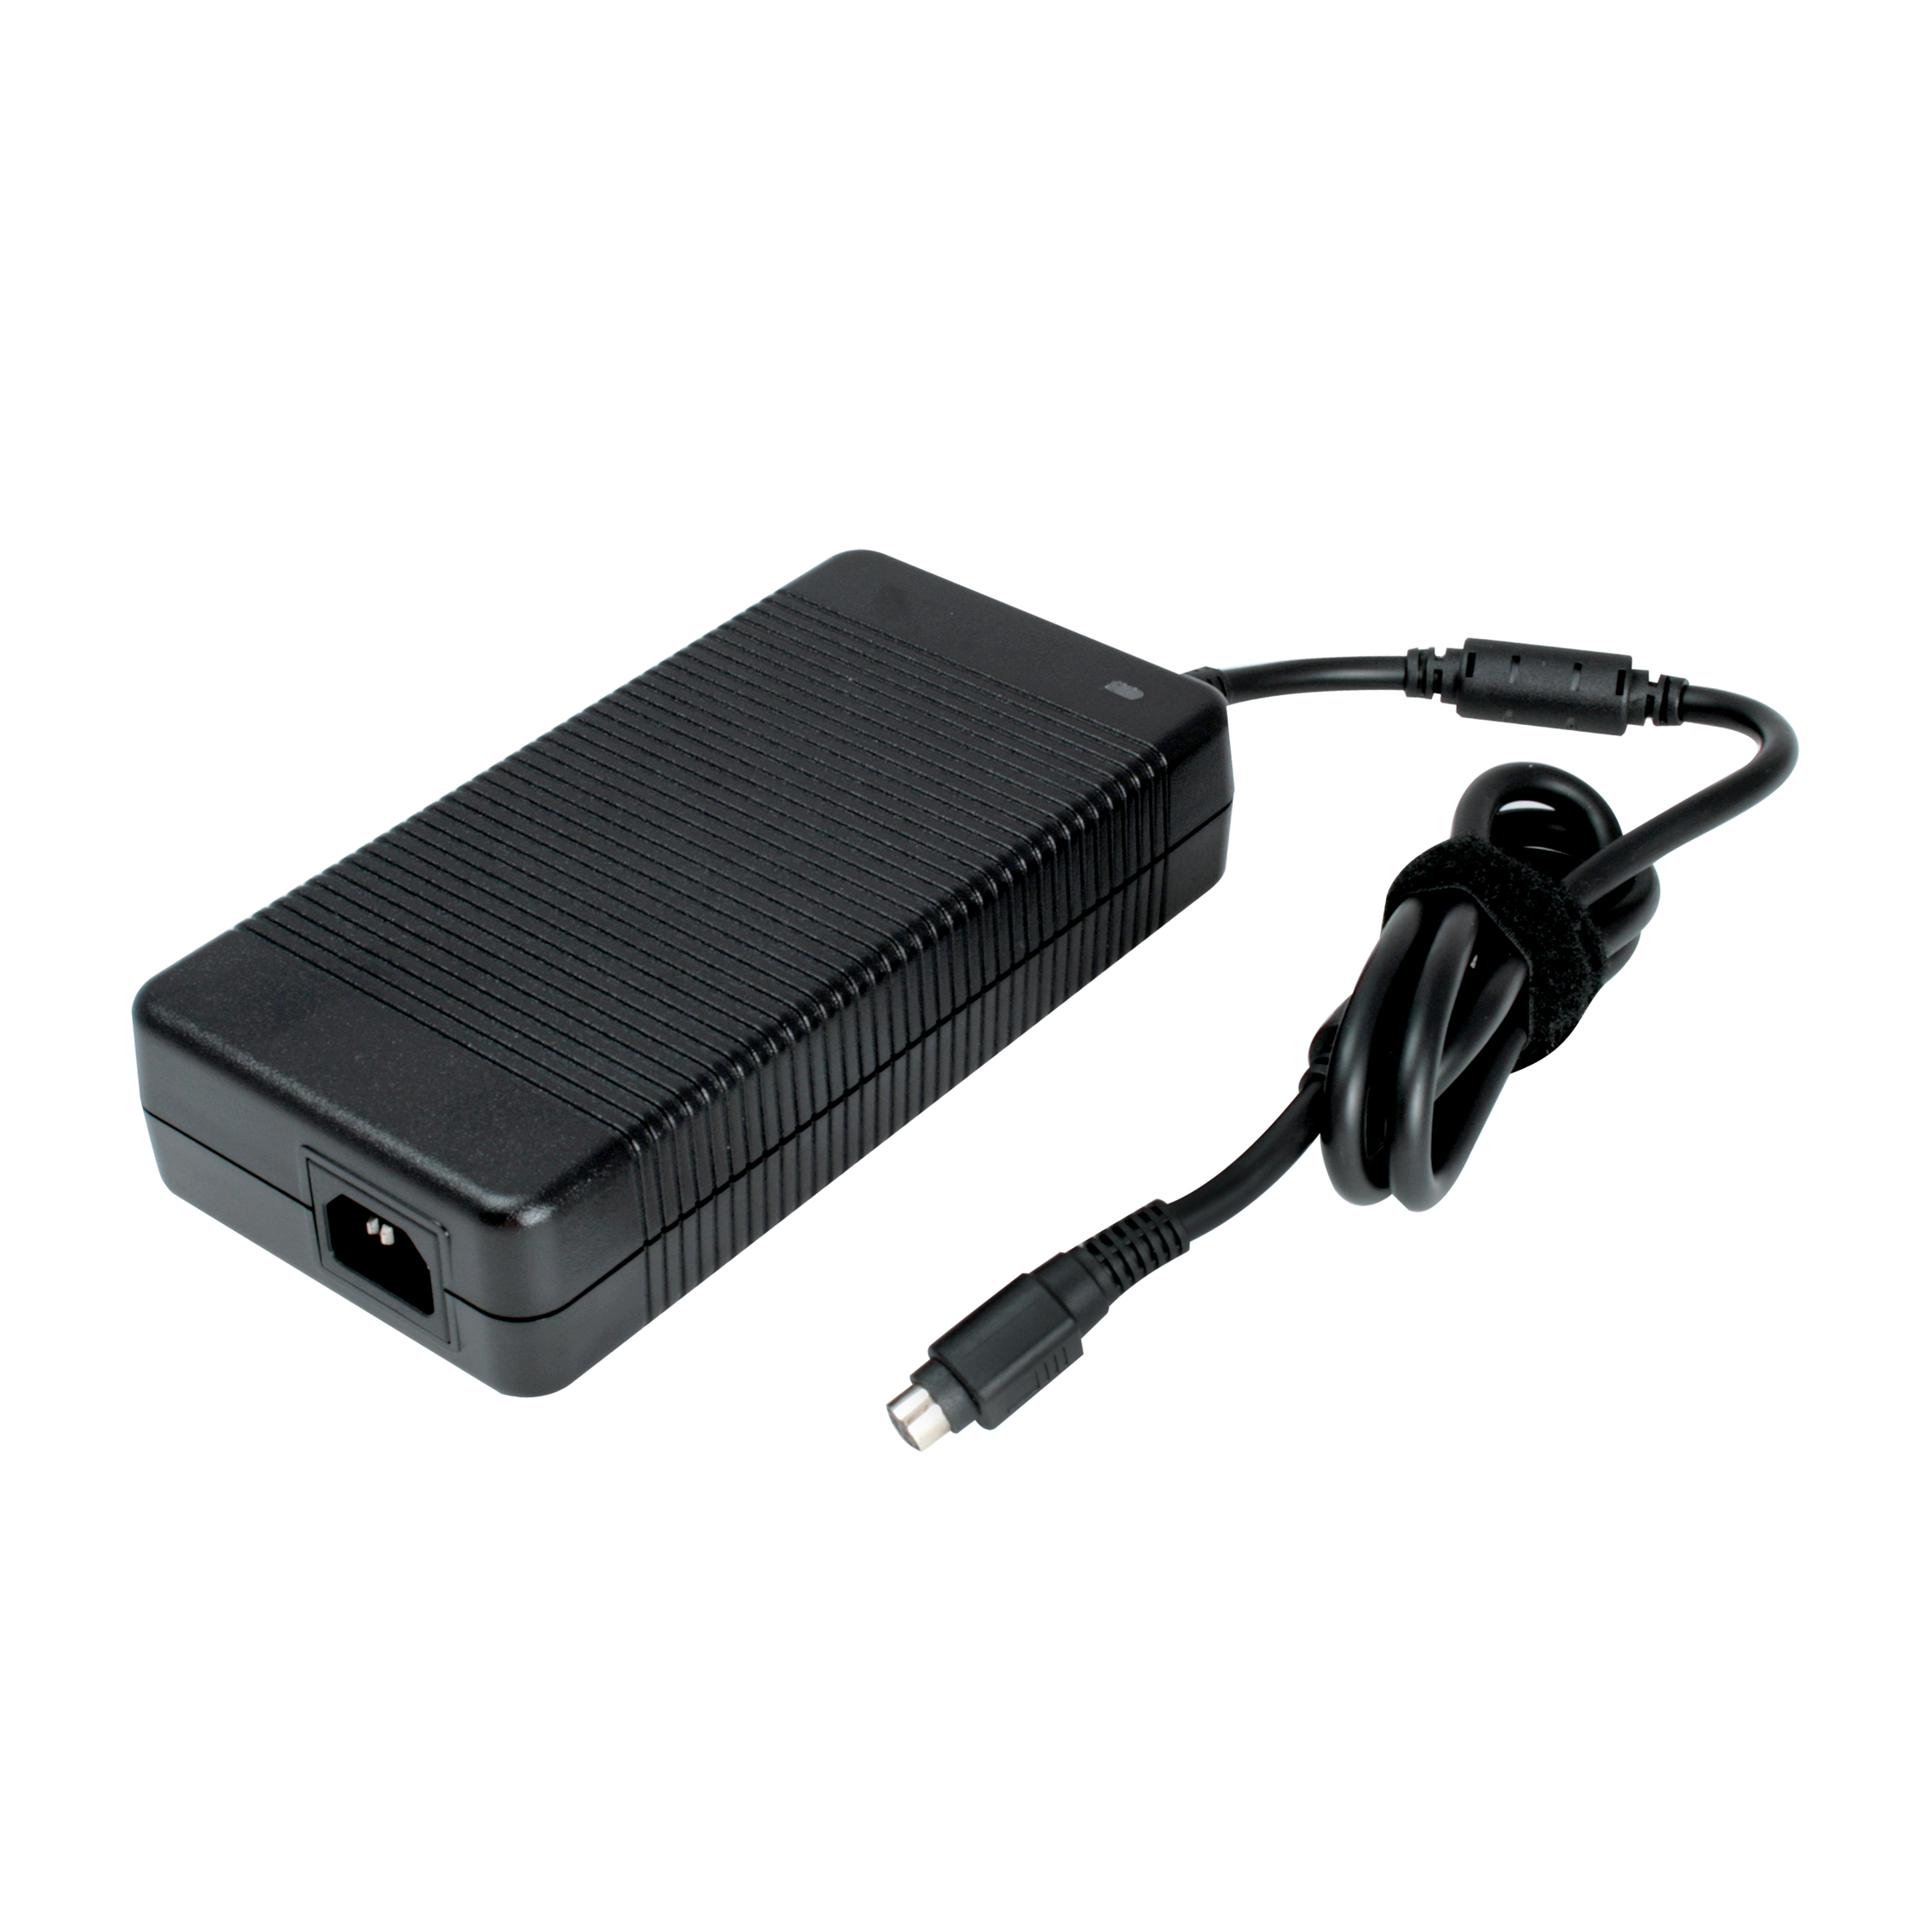 Additional 280W power adapter